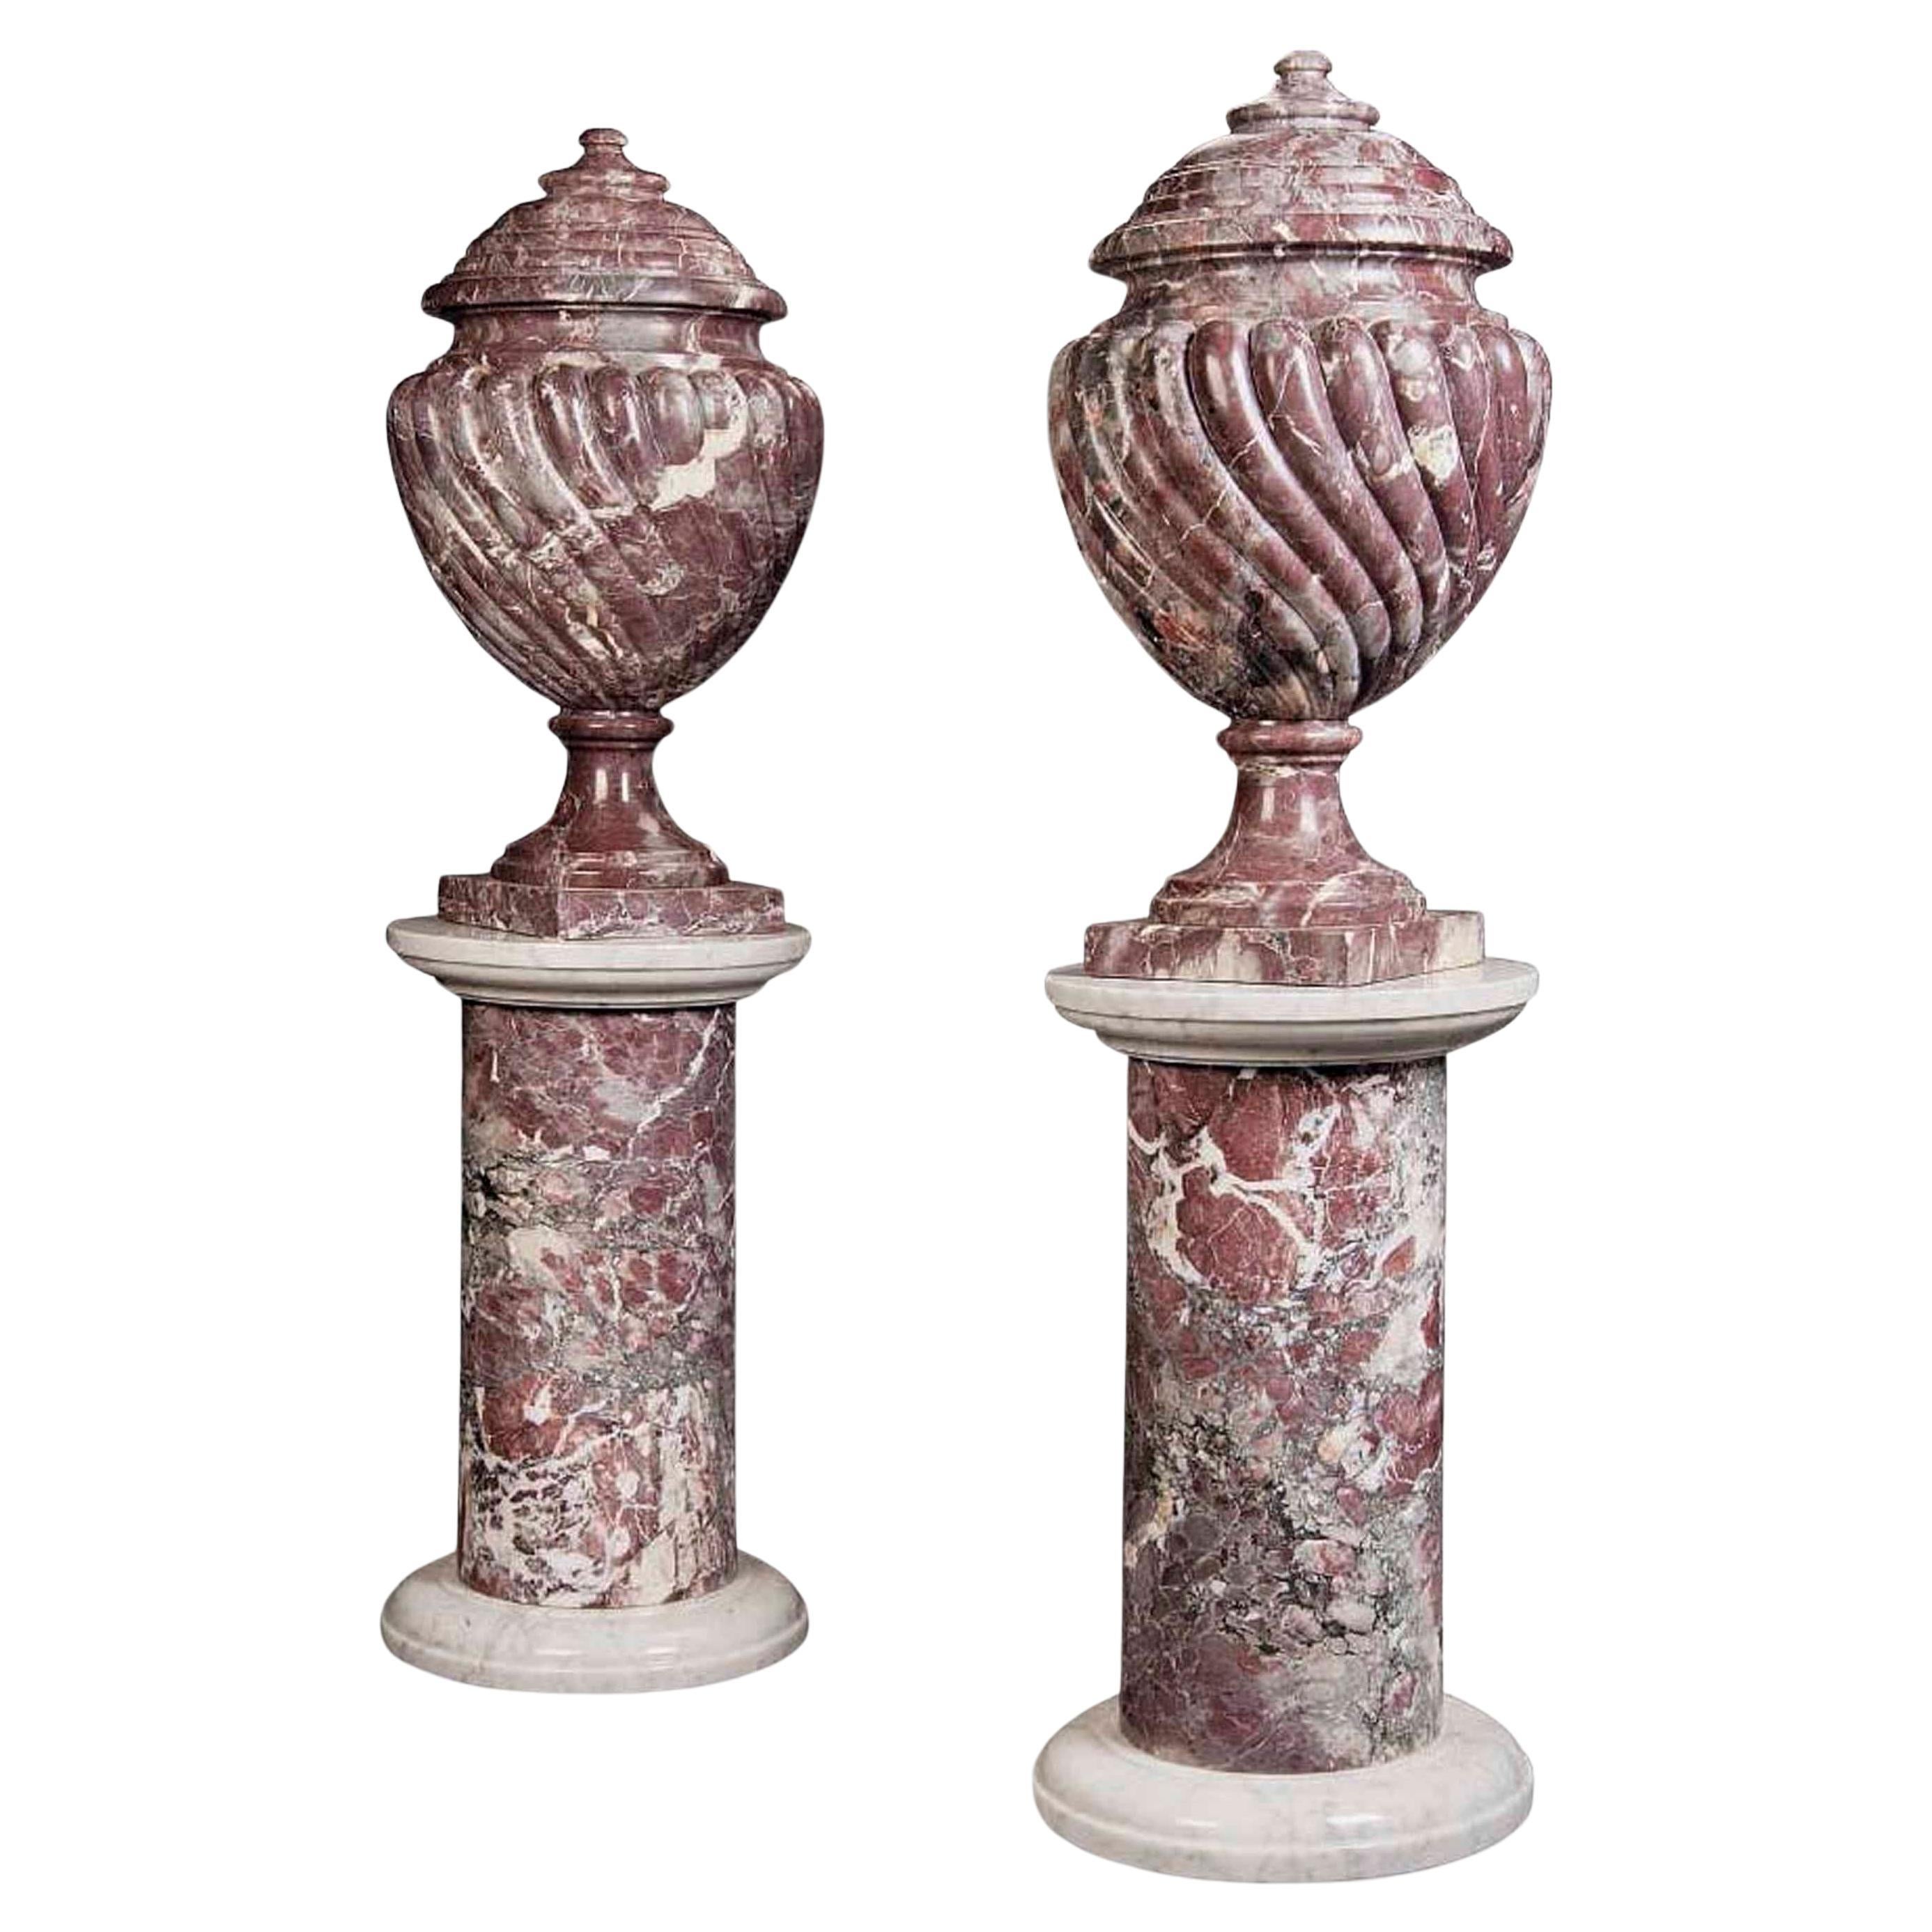 Pair of Monumental Italian Breche Violette Marble Vases and Pedestals